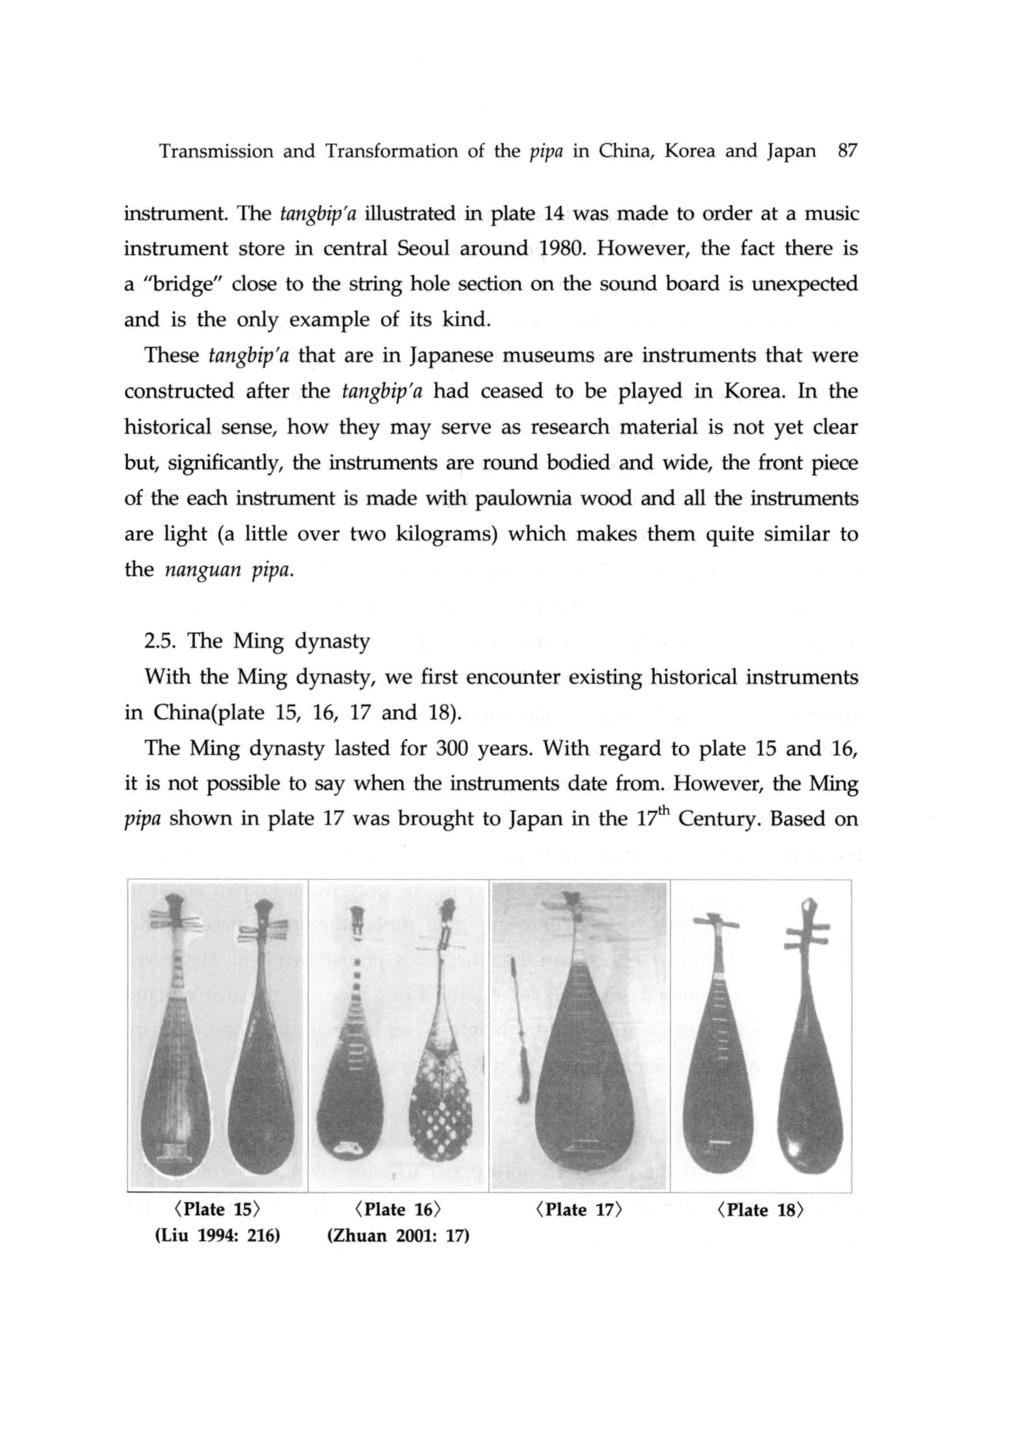 Transmission and Transformation of the pipa in China, Korea and Japan 87 instrument. The tangbip'a illustrated in plate 14 was made to order at a music instrument store in central Seoul around 1980.